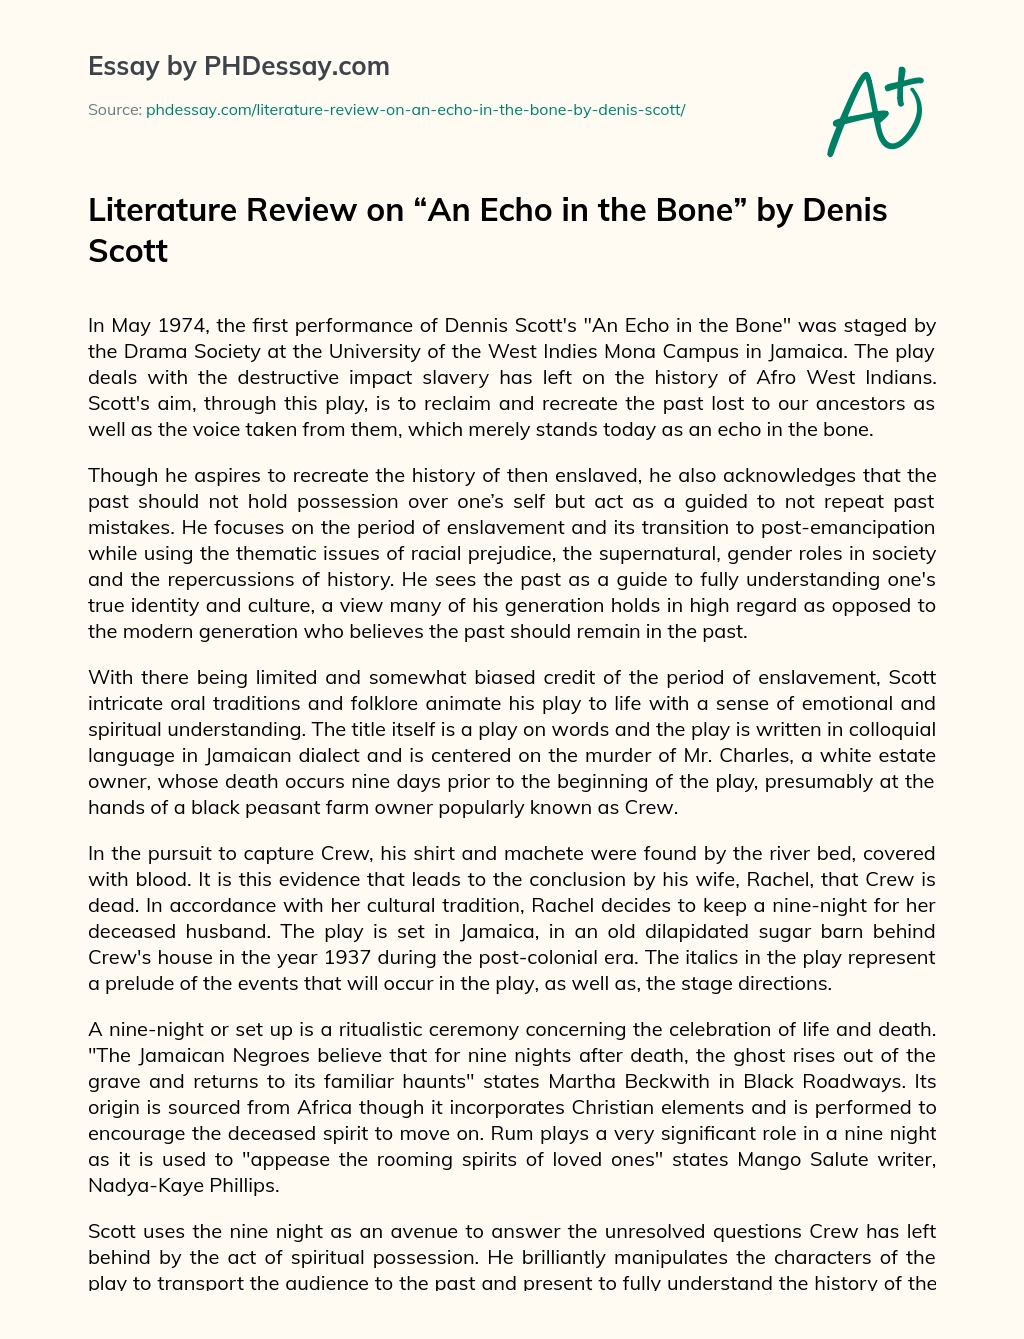 Literature Review on “An Echo in the Bone” by Denis Scott essay